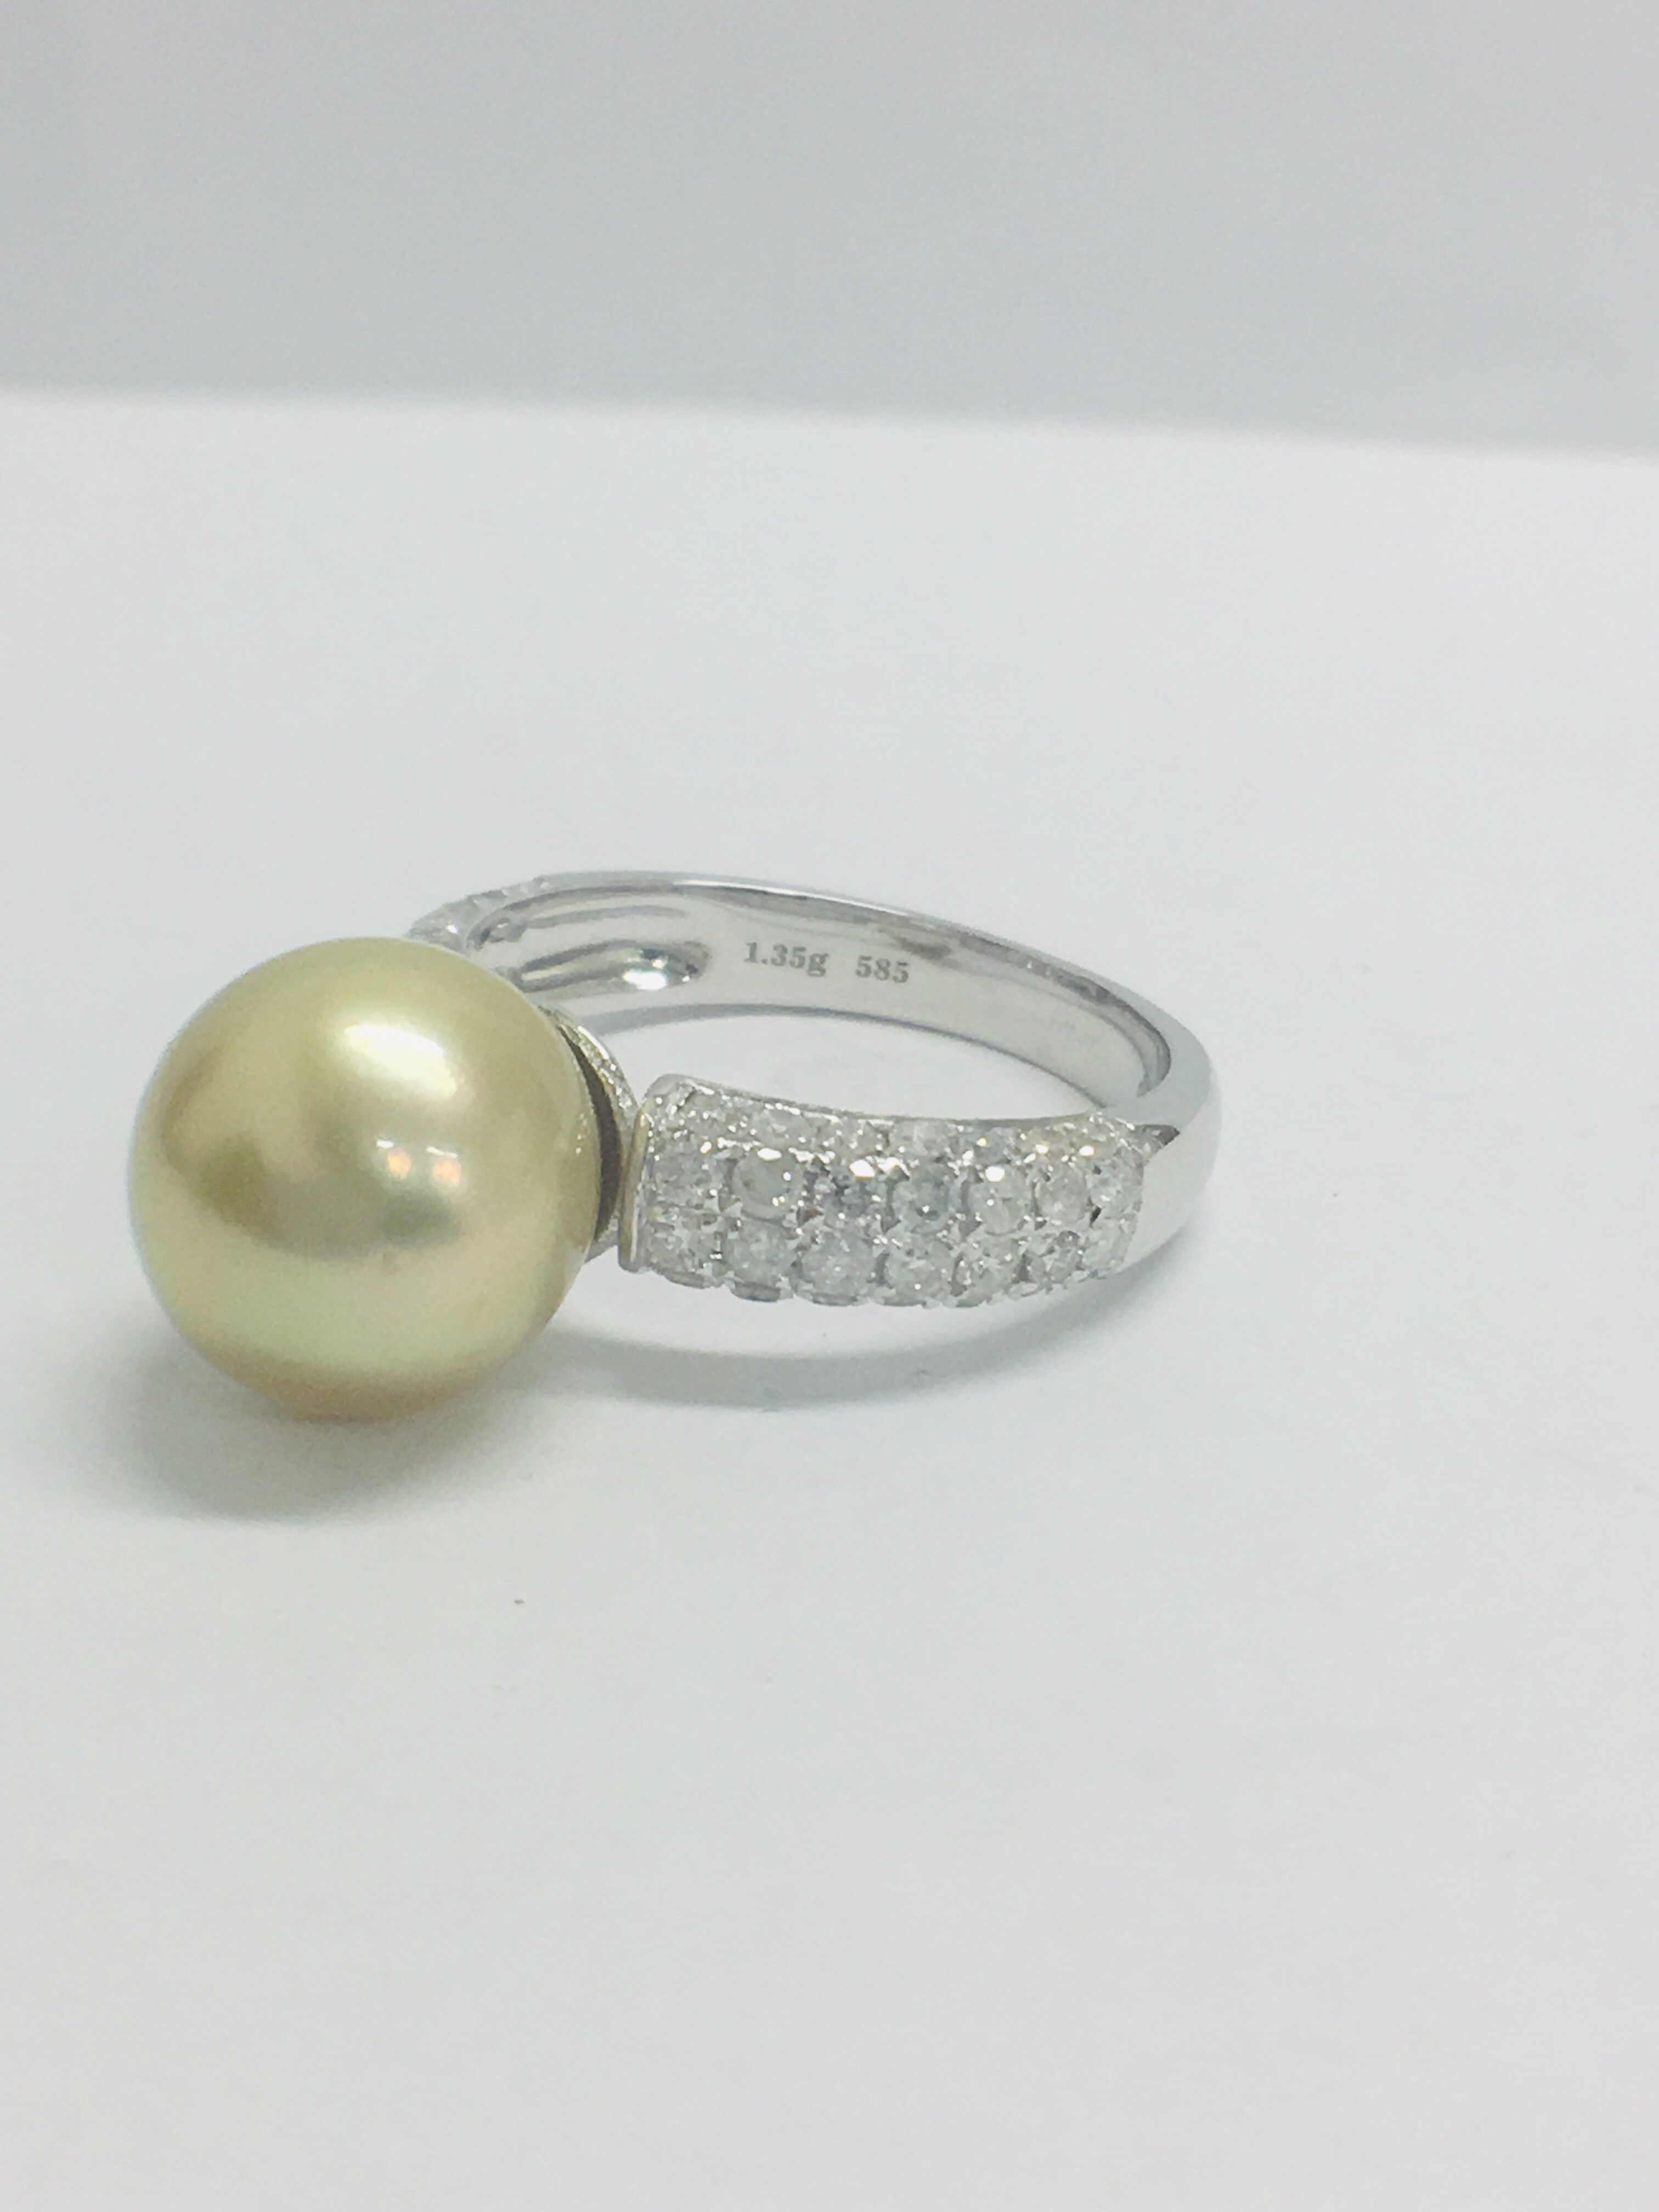 14Ct White Gold Pearl & Diamond Ring. - Image 4 of 11